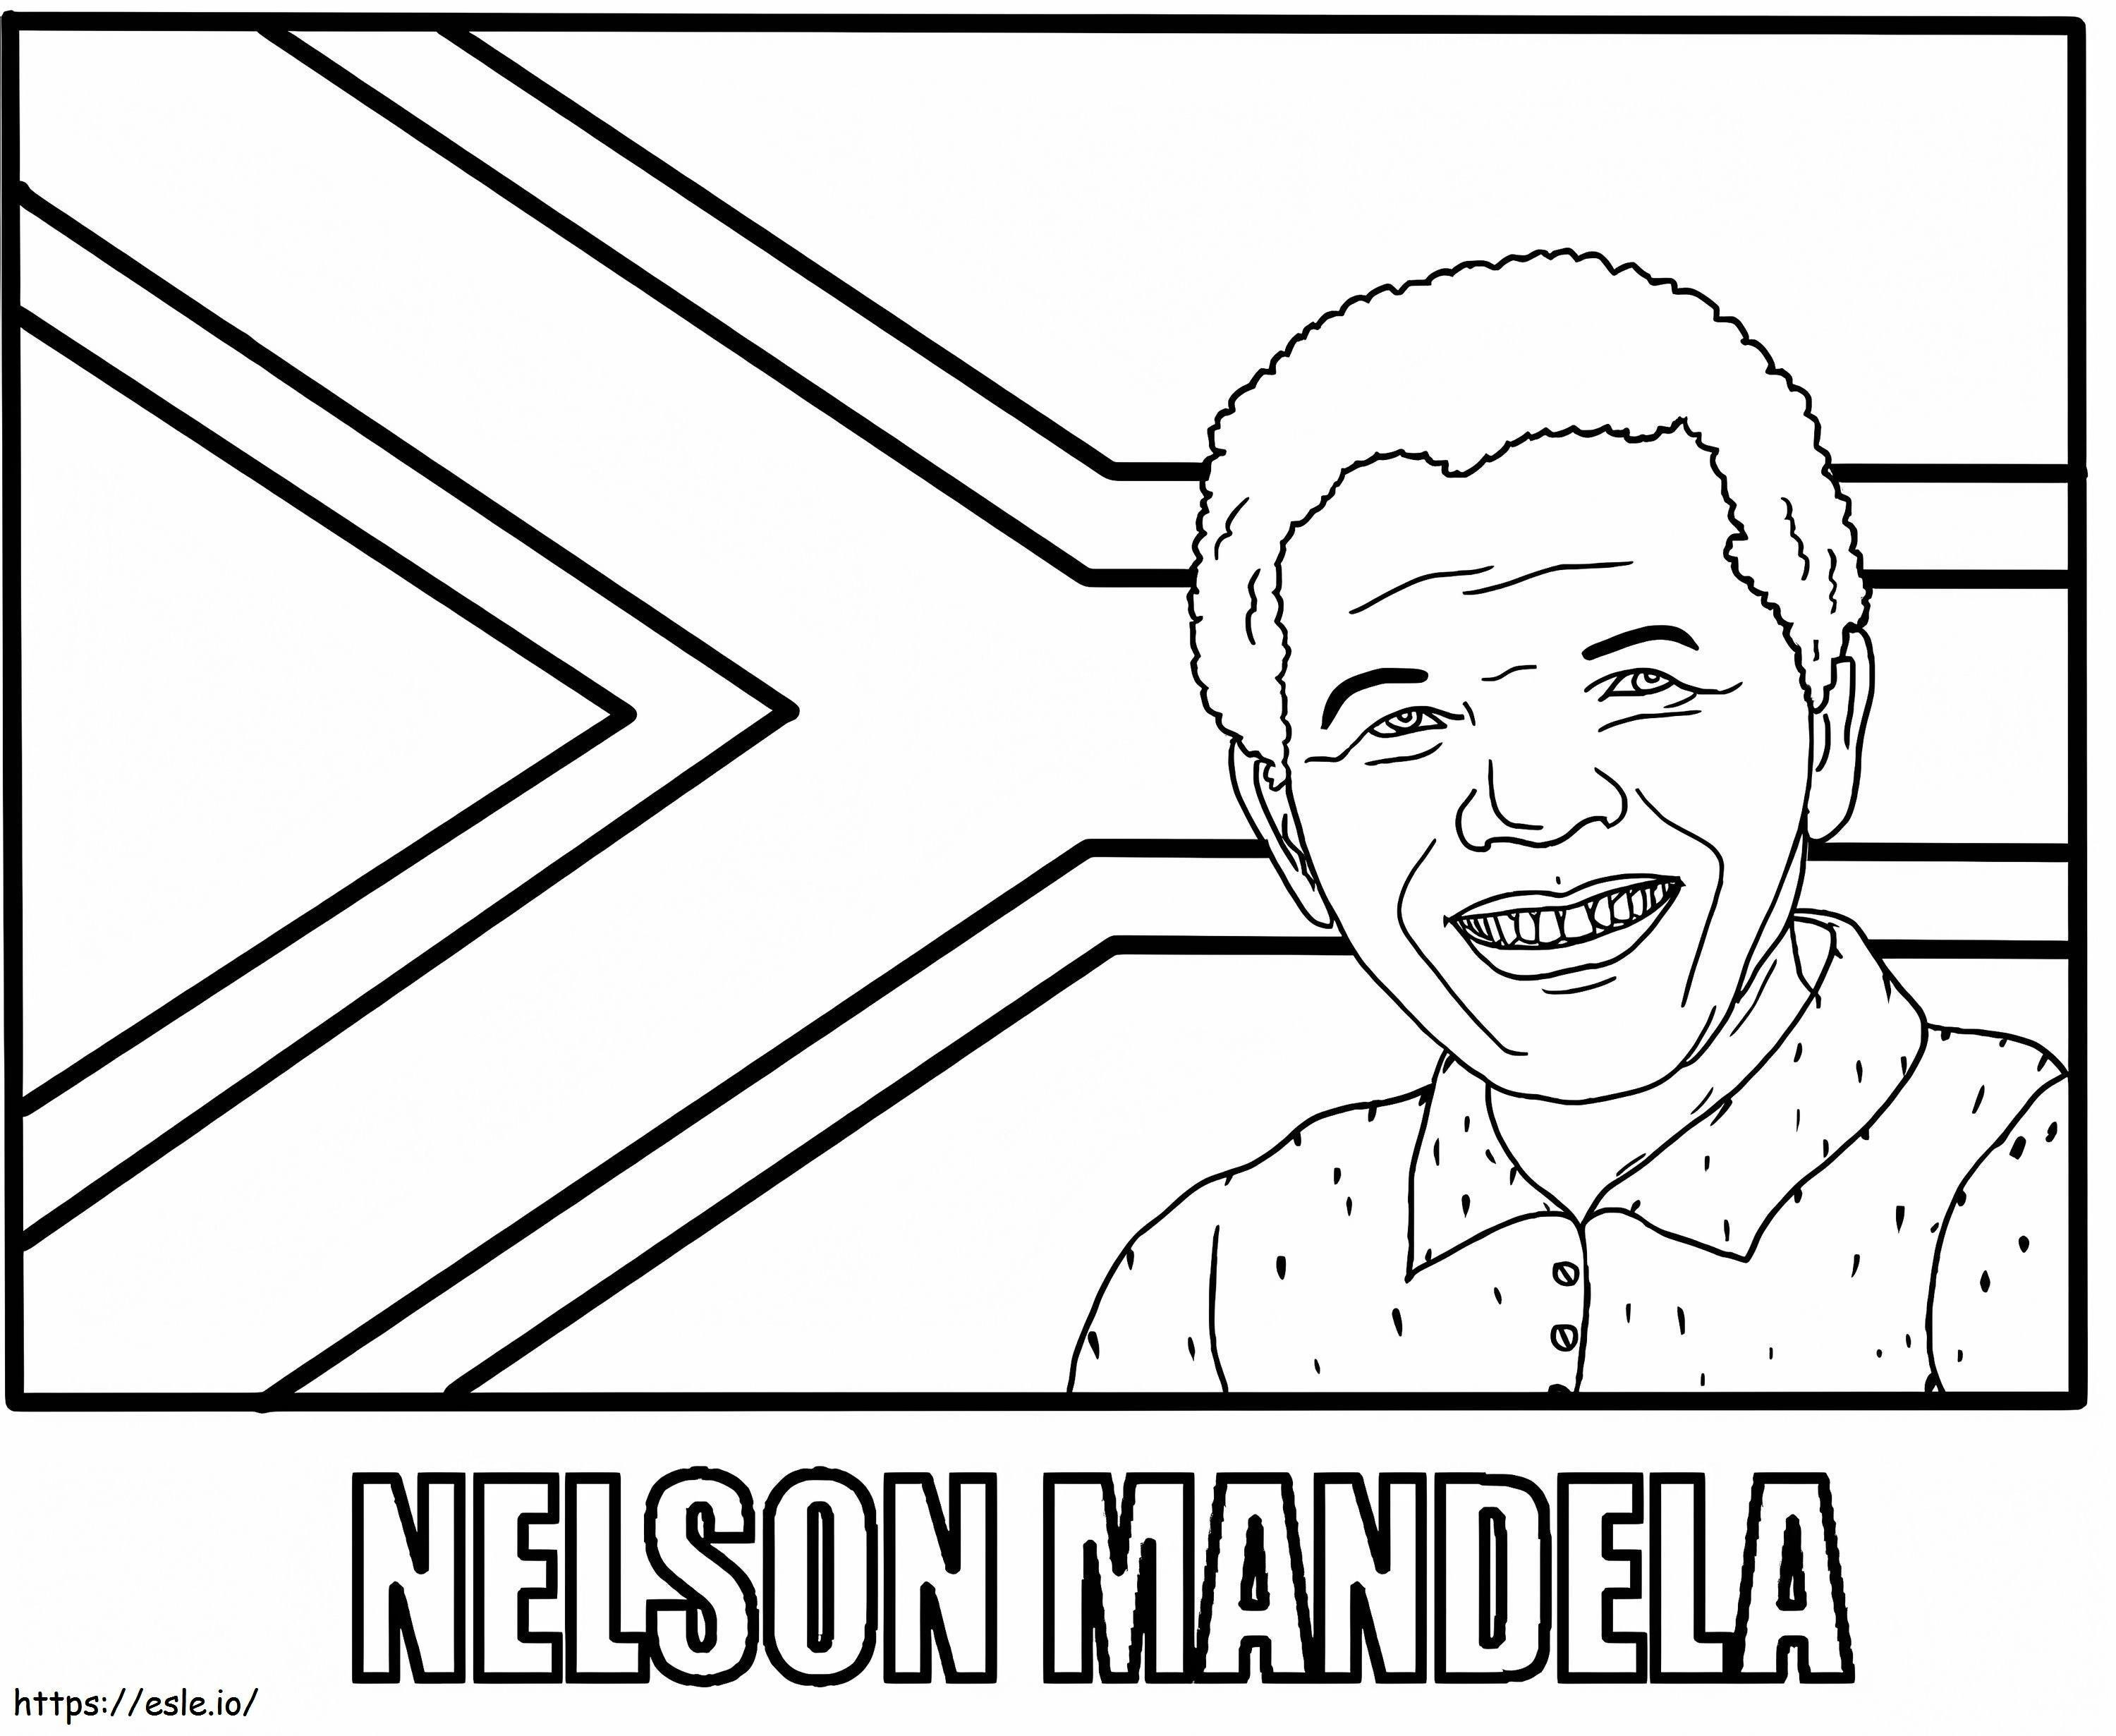 Nelson Mandela 6 coloring page